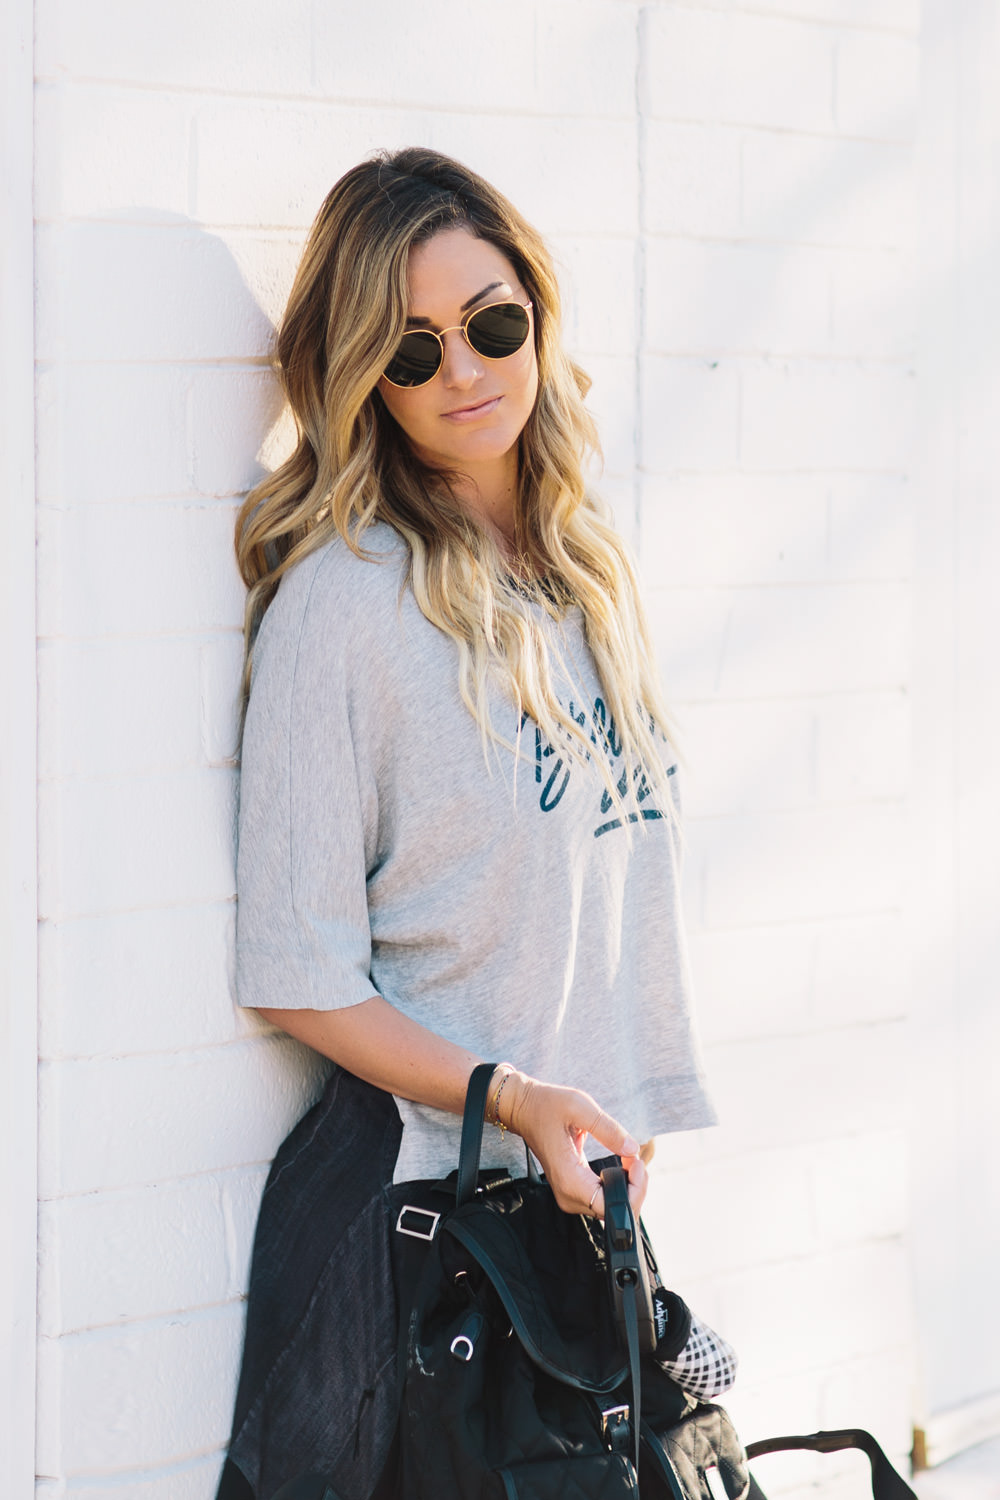 Dash of Darling styles Lucy Activewear for running errands in a casual athleisure outfit.